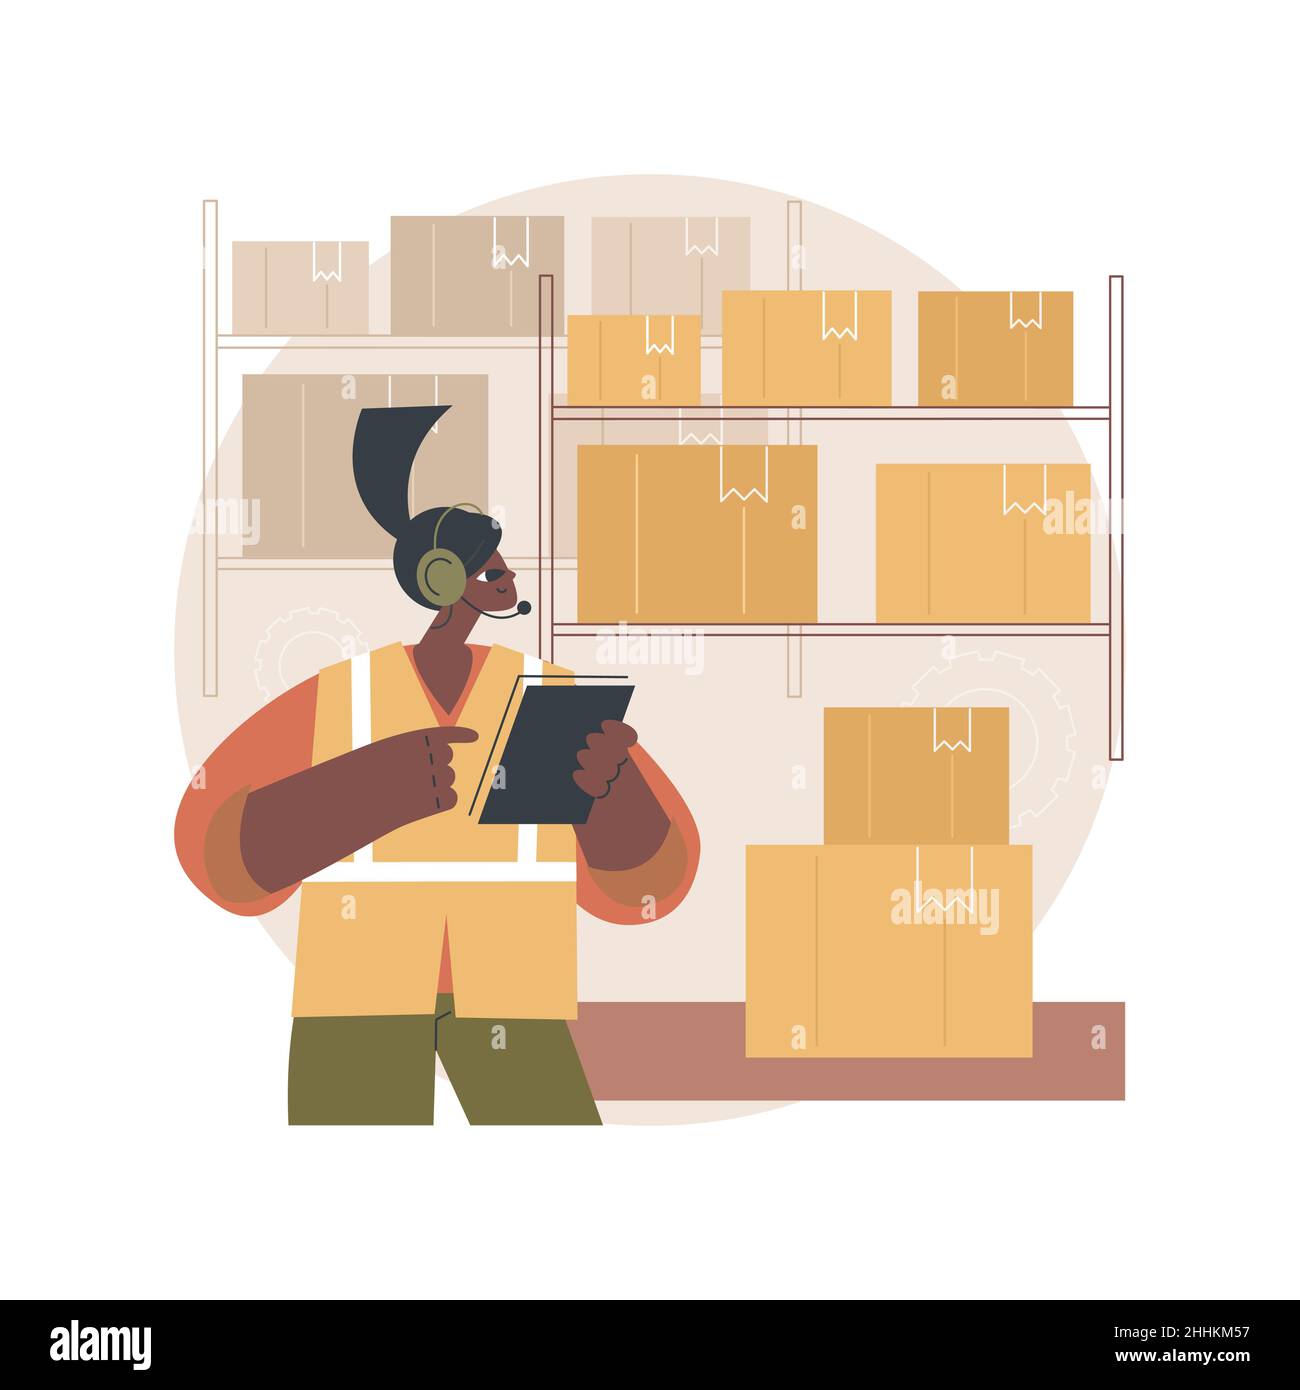 Warehouse voice tasking abstract concept vector illustration. Voice picking, speech-based warehousing, hands-free and eyes-free system, accurate automated paperless operations abstract metaphor. Stock Vector